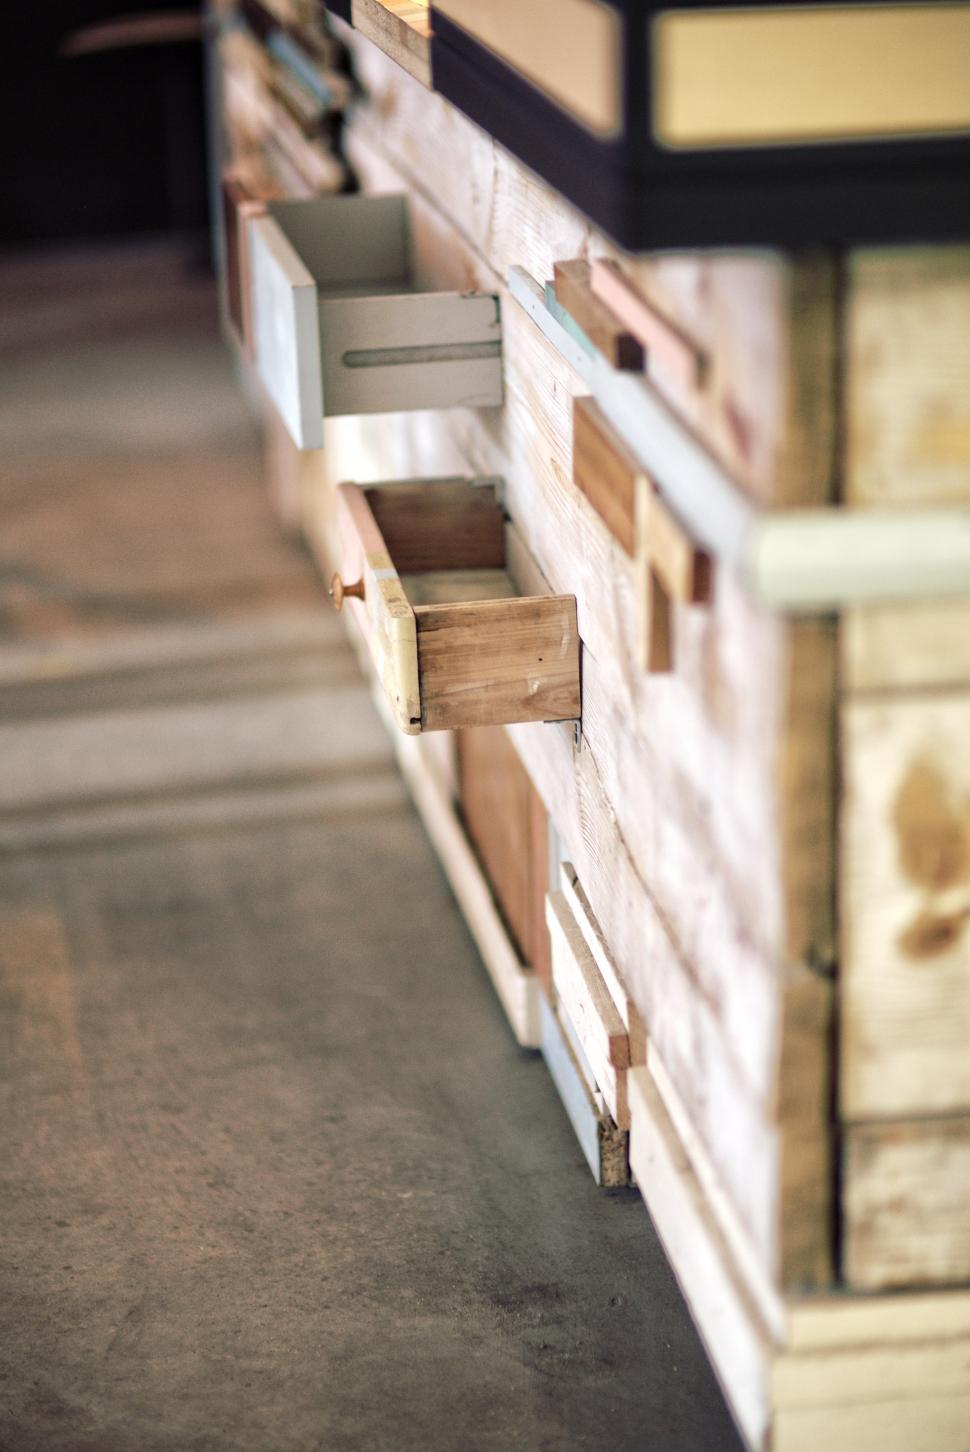 Free Image of Close Up of a Wooden Dresser With Drawers 